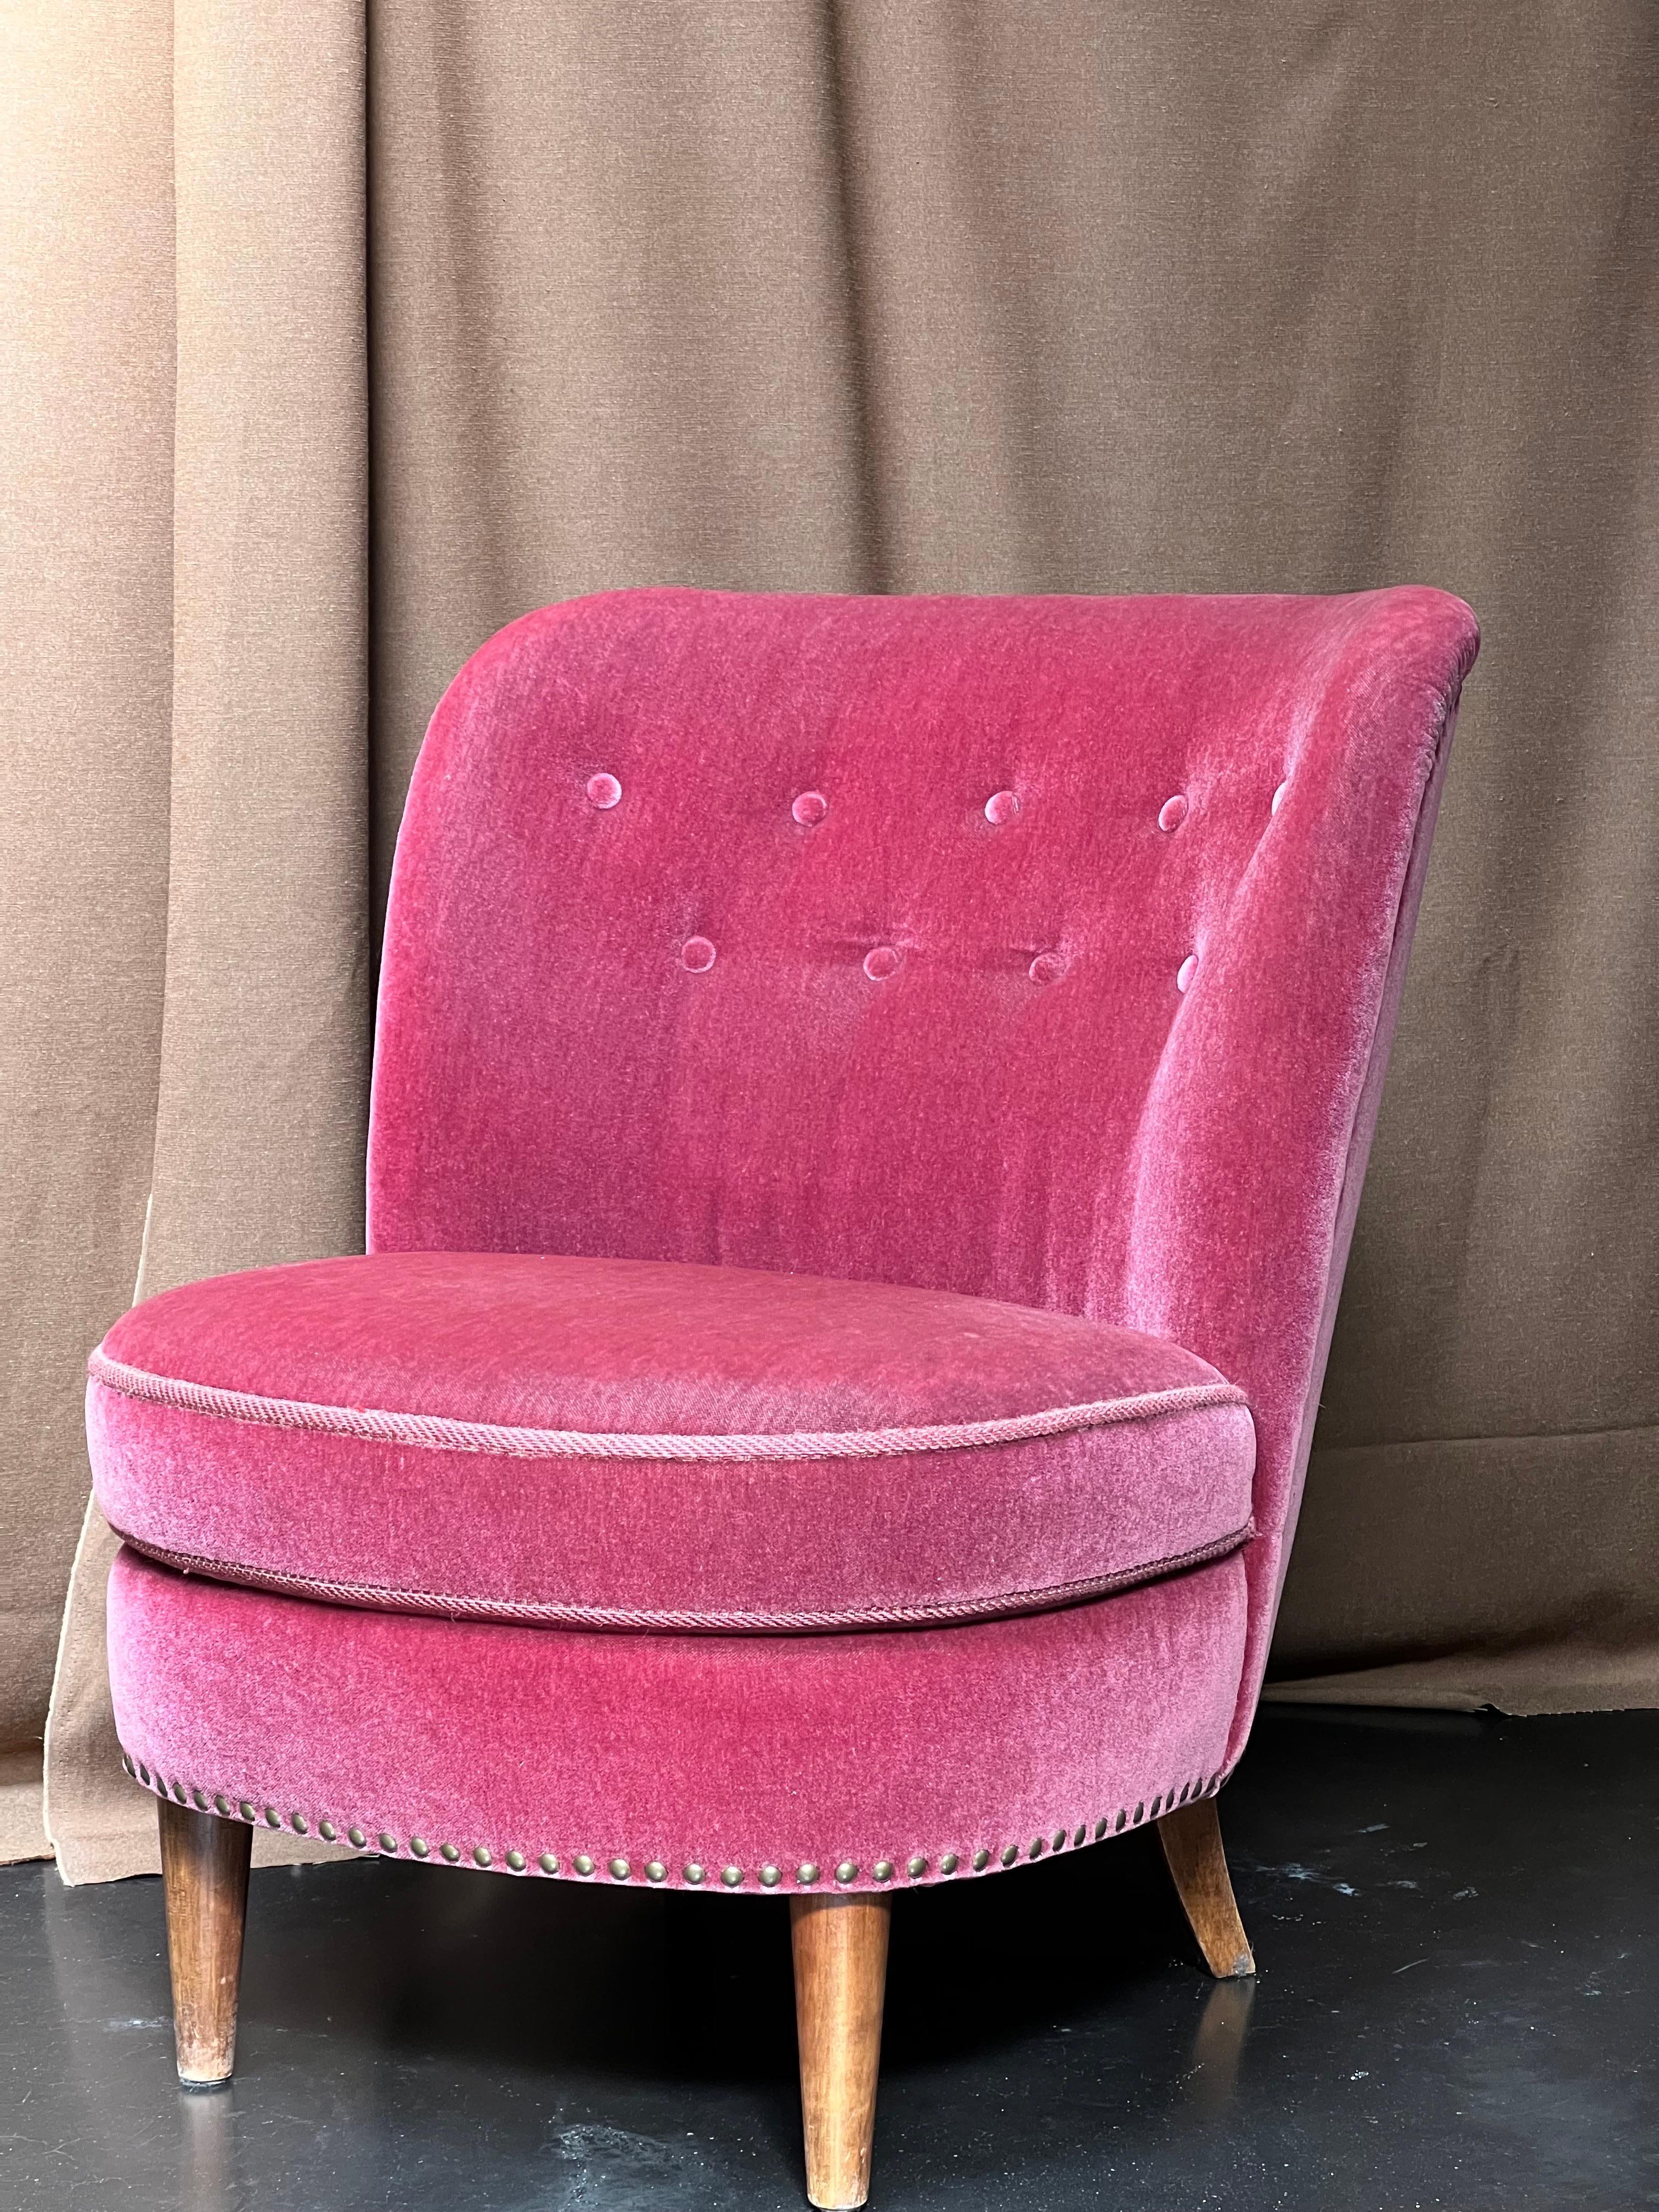 Elegant pink mohair single armchair made in the 1930s in the Swedish grace style. It is the Swedish Art Deco movement. Nailed on the backrest with brass nails. The feet are made out of light colored hardwood. Dimensions to be confirmed.